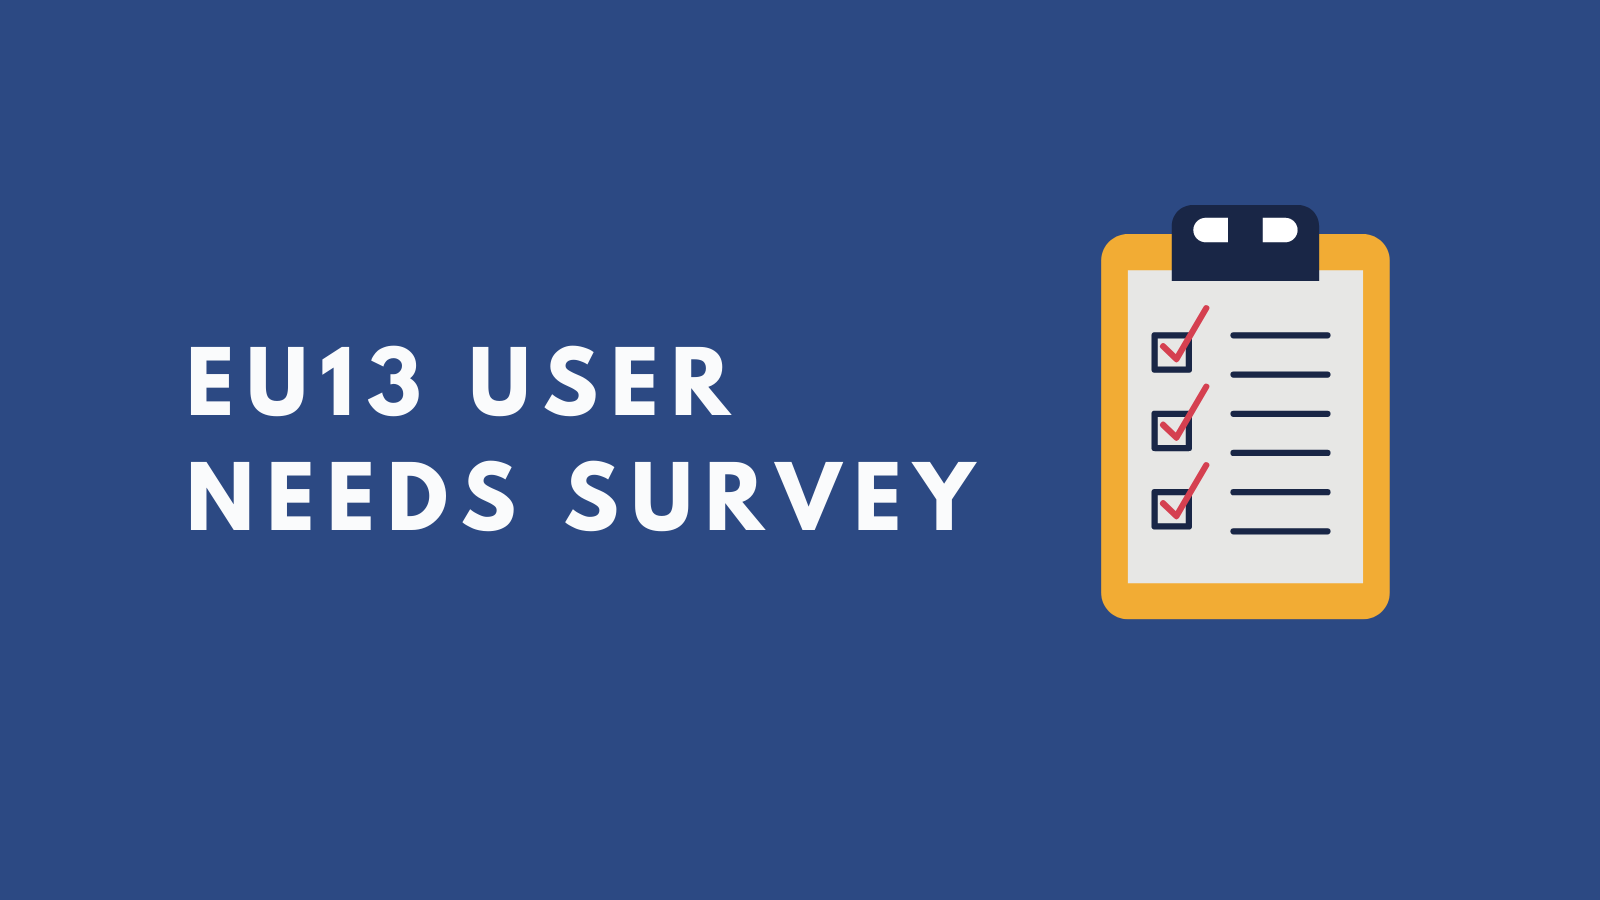 EU13 User needs survey with blue background and notepad icon